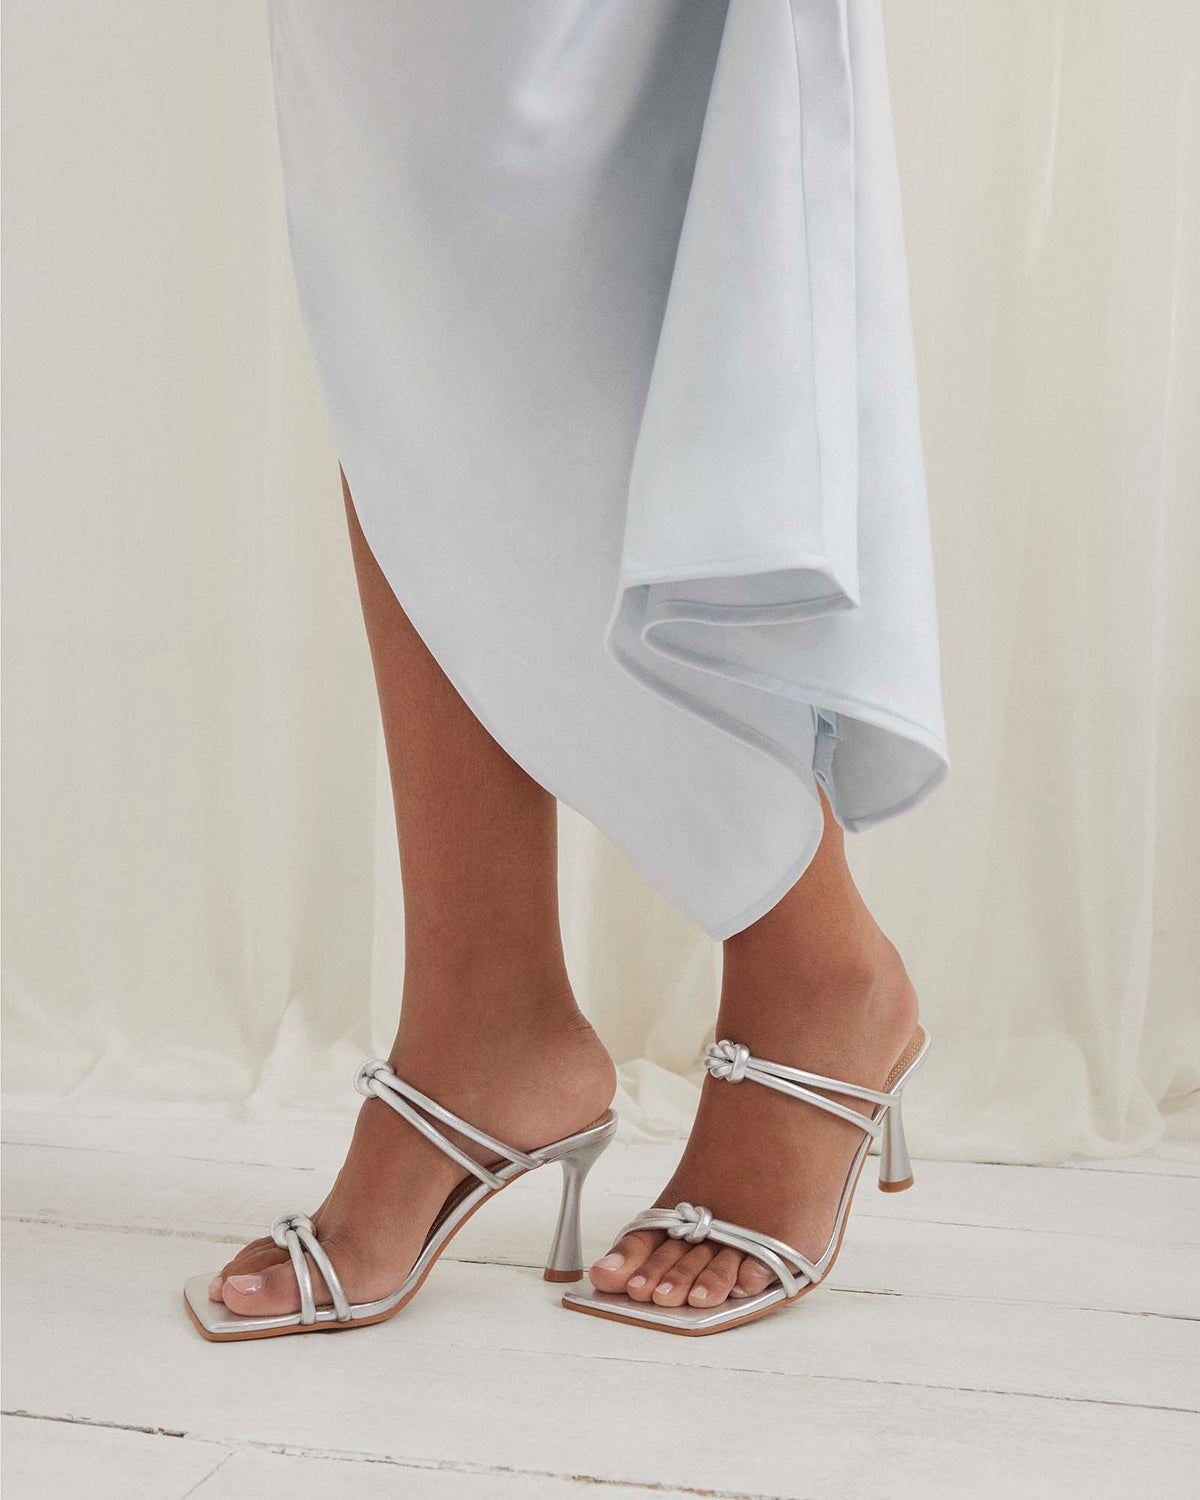 HARLOW HIGH HEEL SANDALS SILVER LEATHER